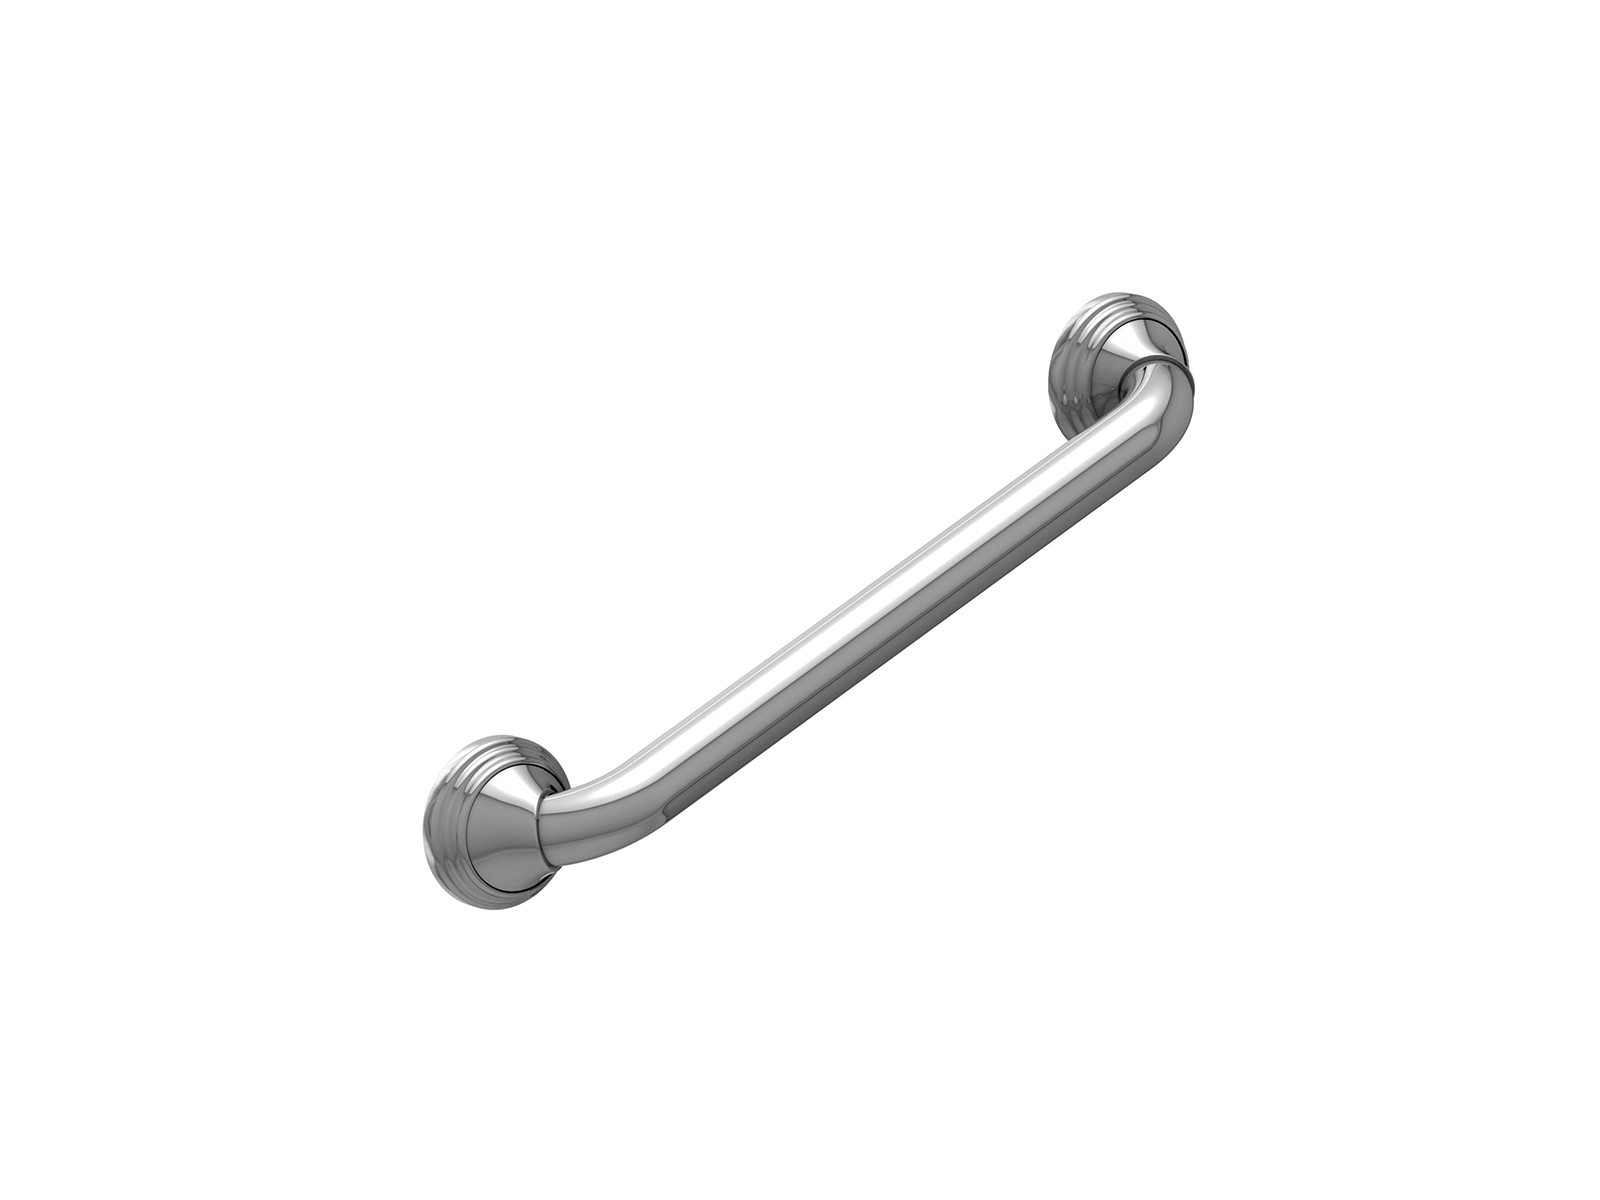 https://www.bathfitter.com/wp-content/uploads/2020/09/Accessories-Security-Grab-Bar-Curled-Grip-Chrome.png